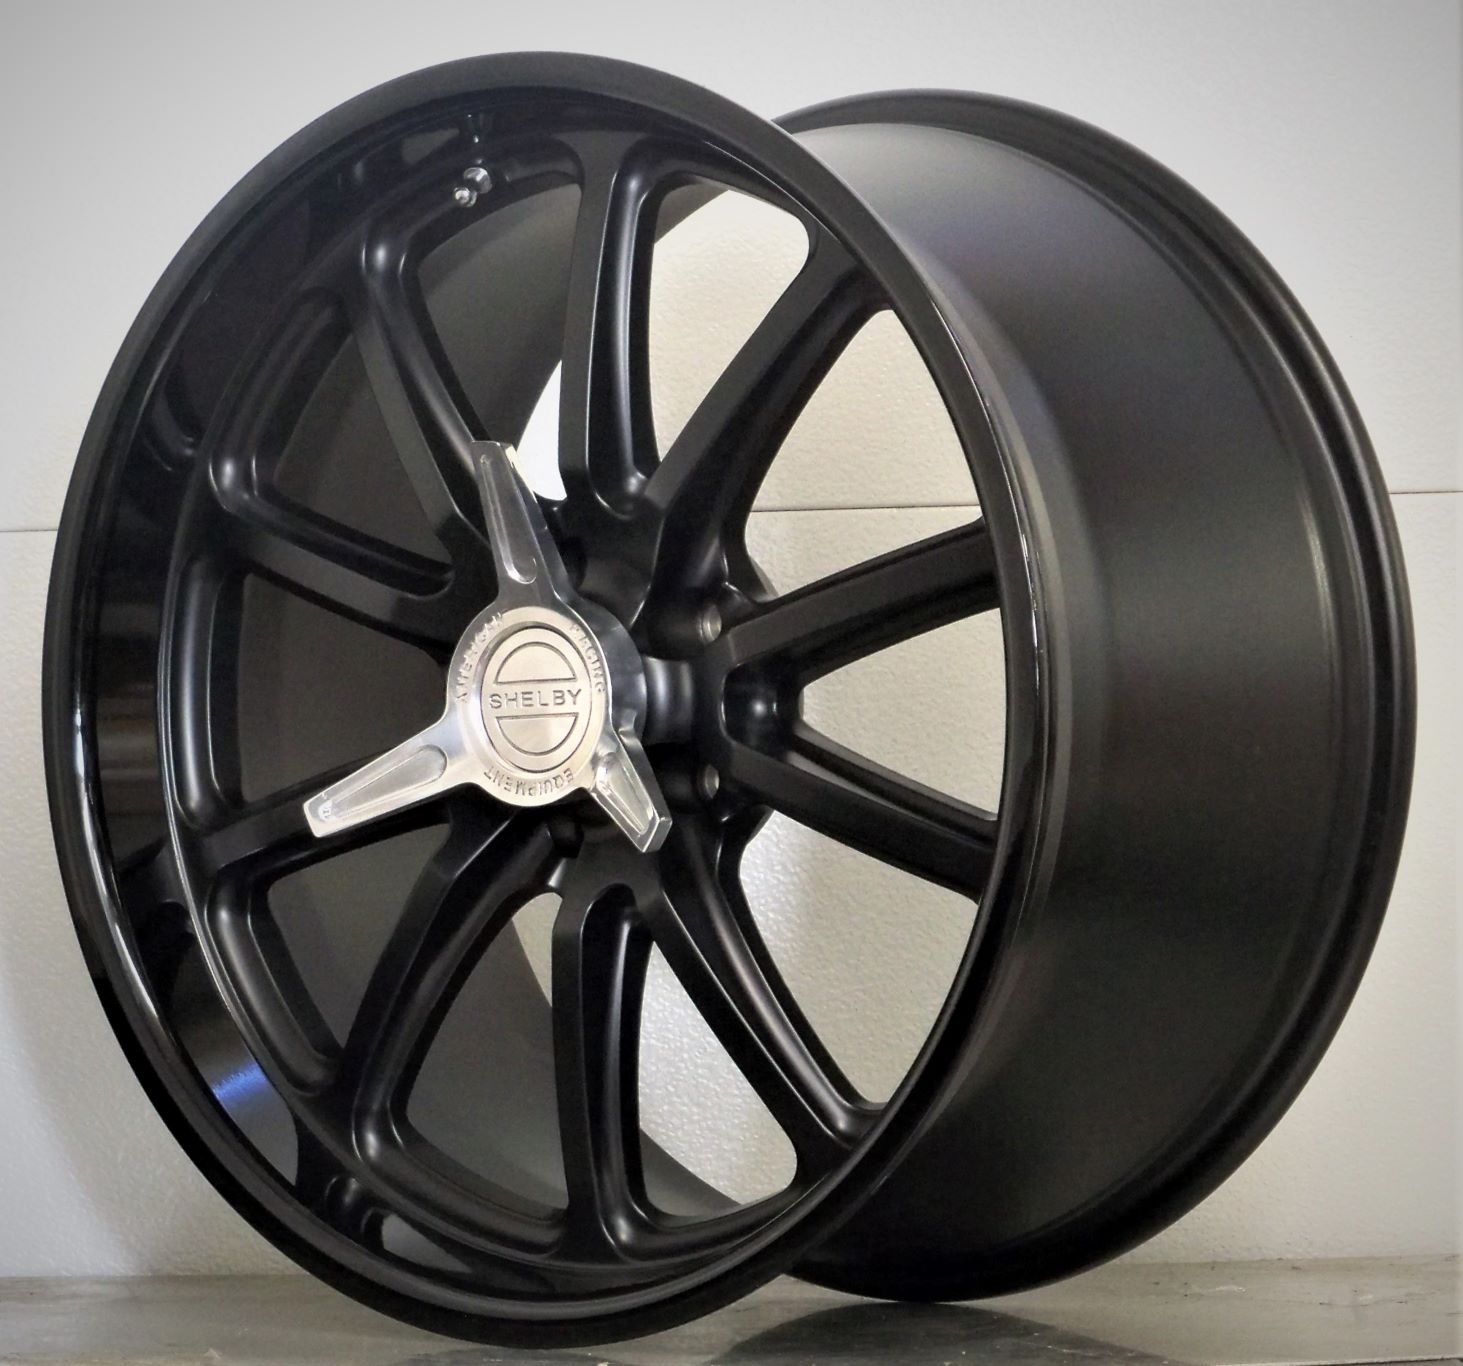 20s set of 4 RSB US Mags Shelby spinners Satin Black 05-22